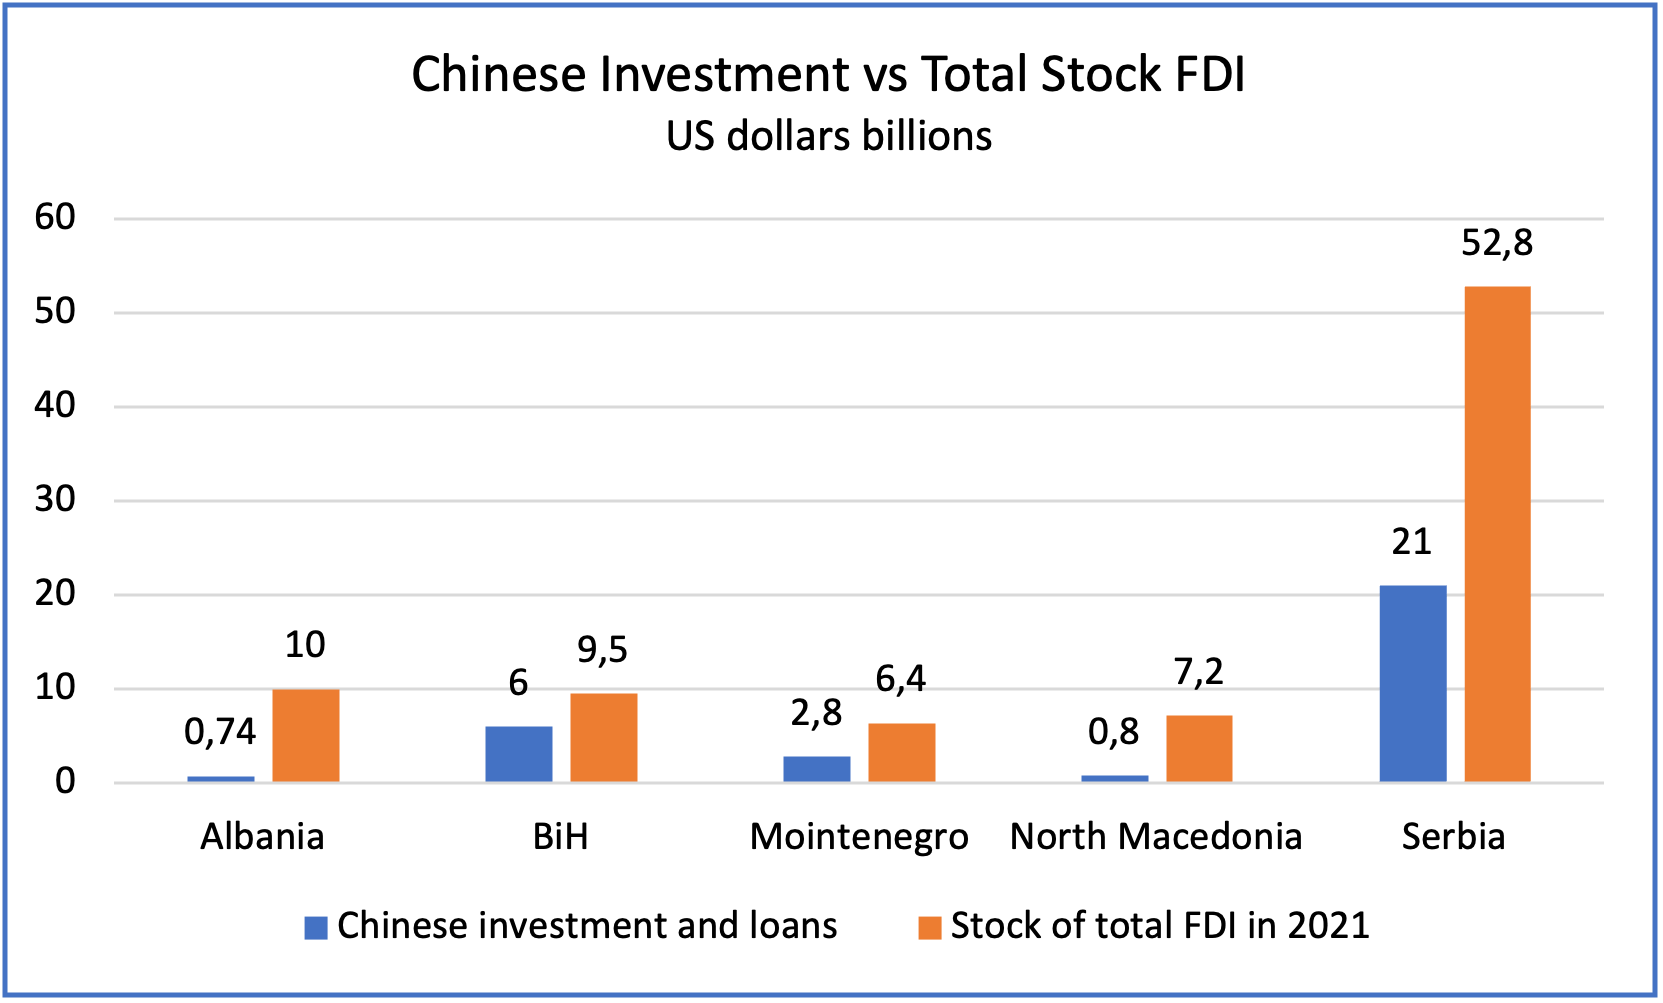 Chinese Investments in the Western Balkans compared with total stock of FDI